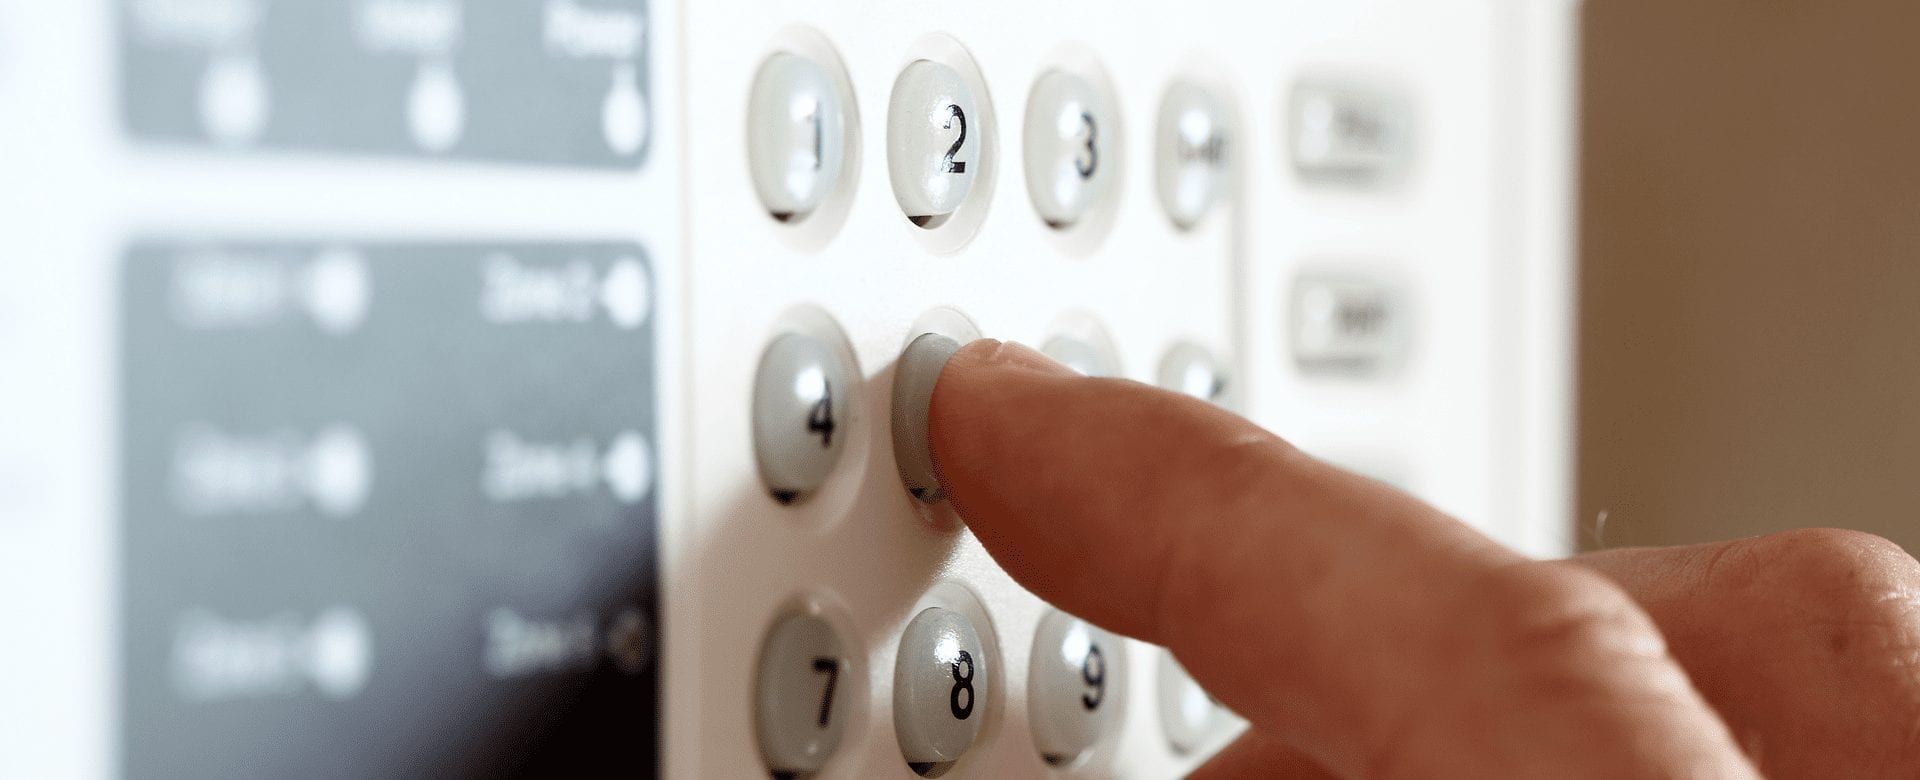 a person is pressing a button on a security system